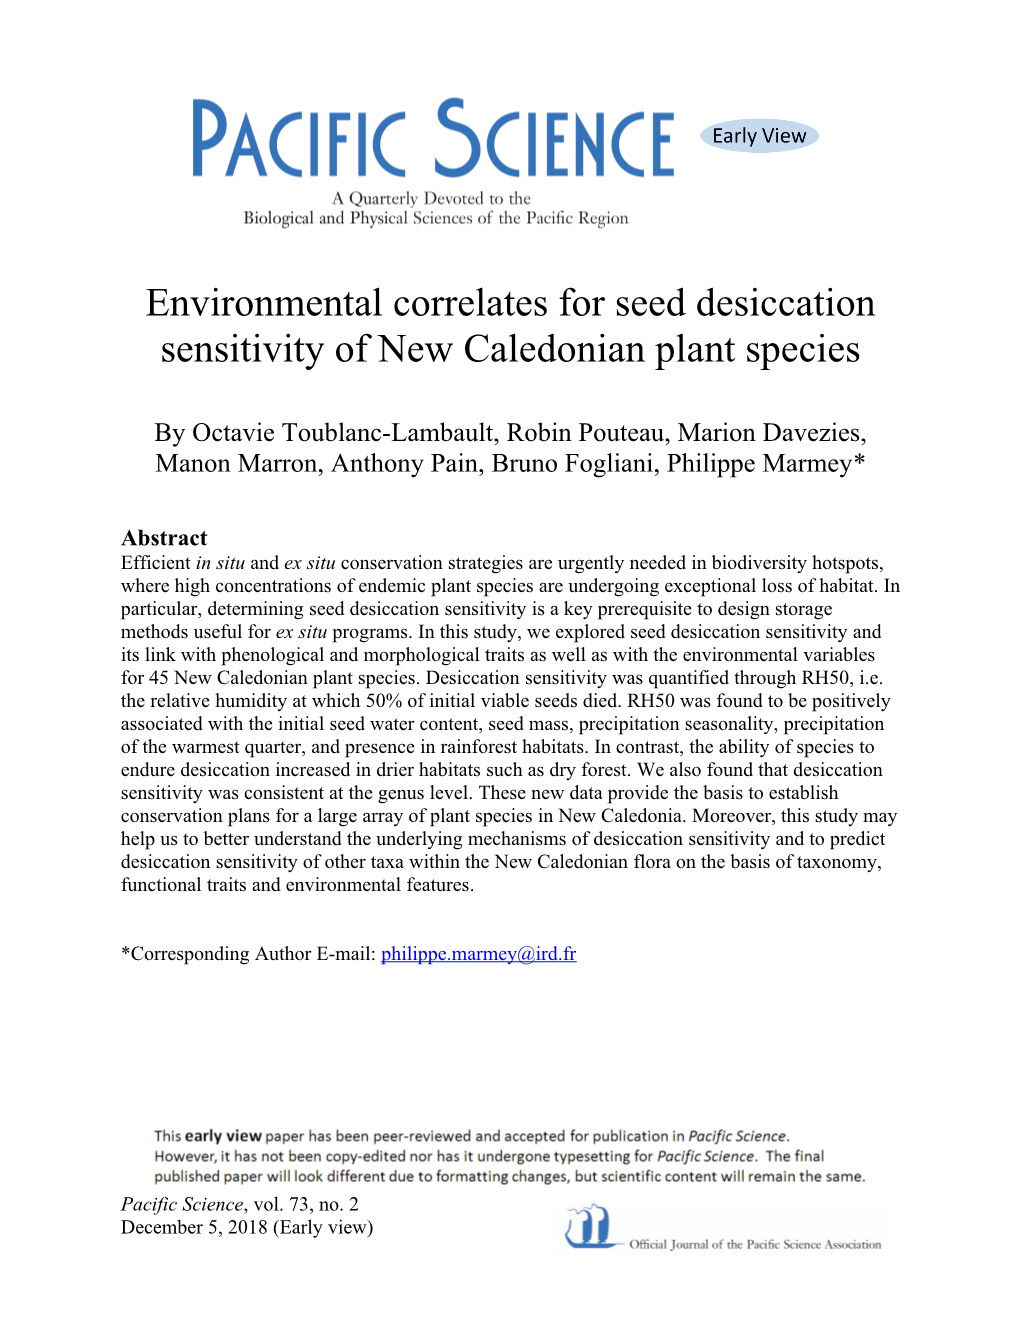 Environmental Correlates for Seed Desiccation Sensitivity of New Caledonian Plant Species